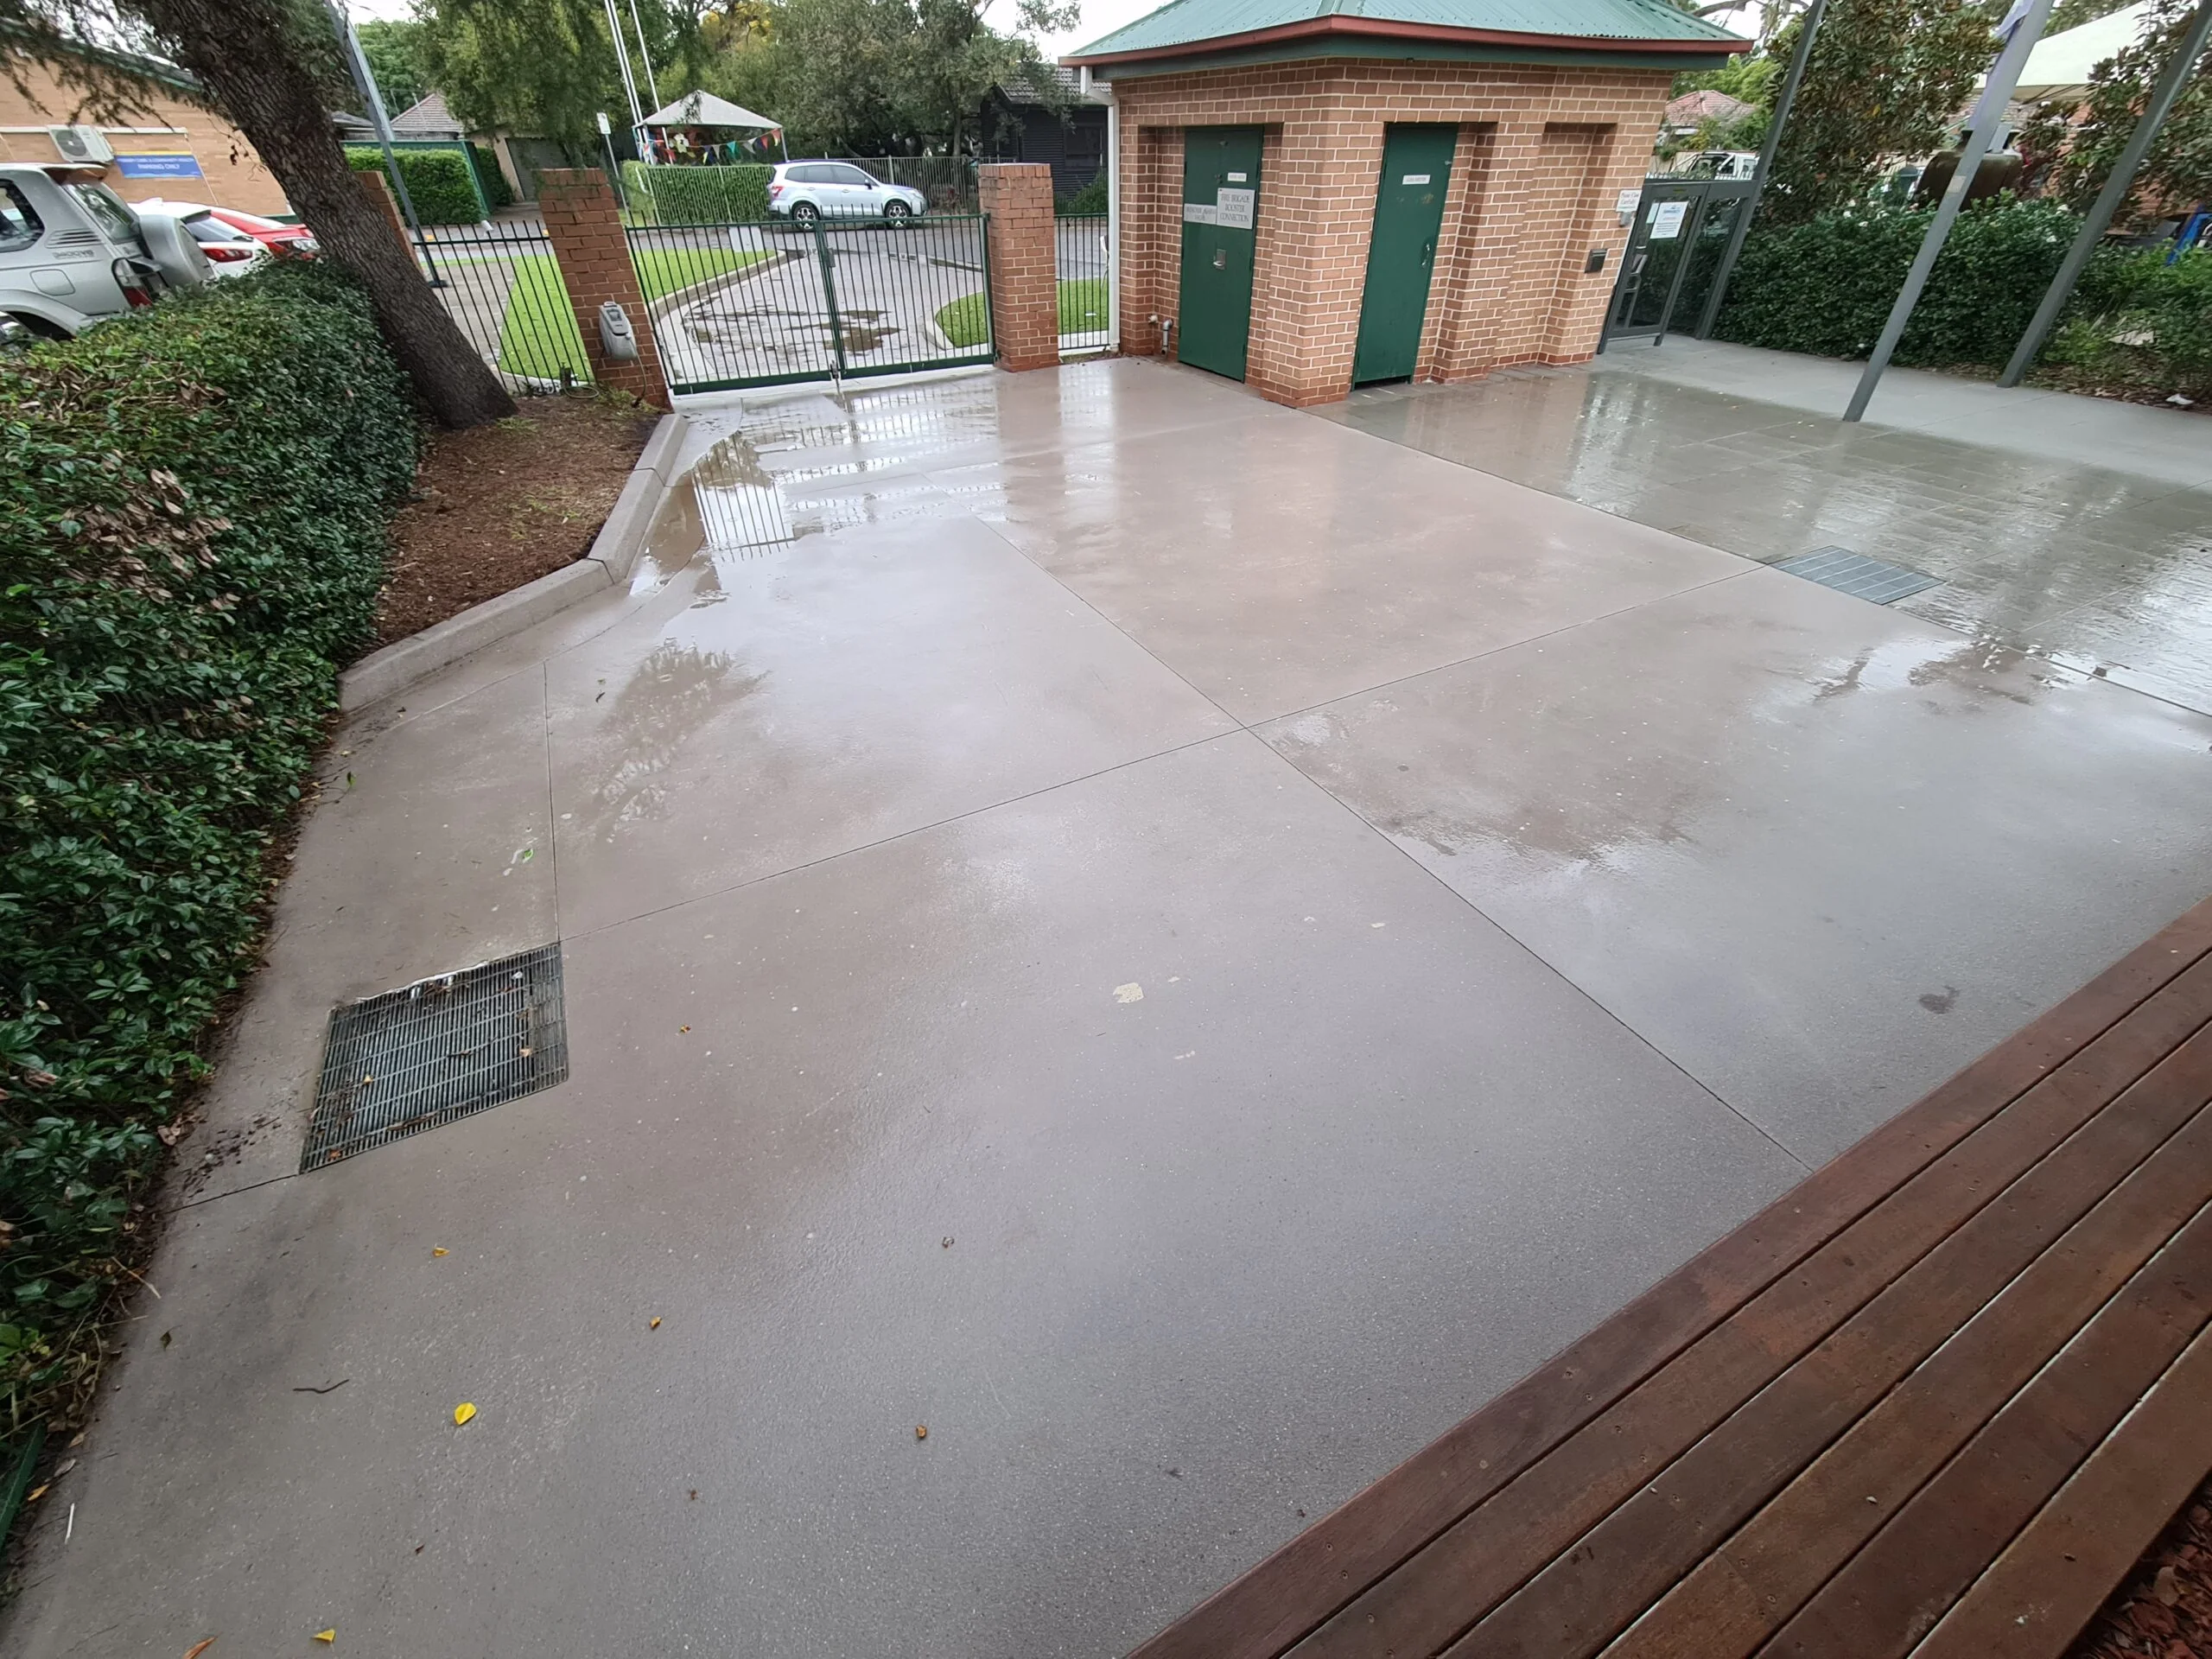 pressure cleaning and washing services in Sydney and surrounding areas.